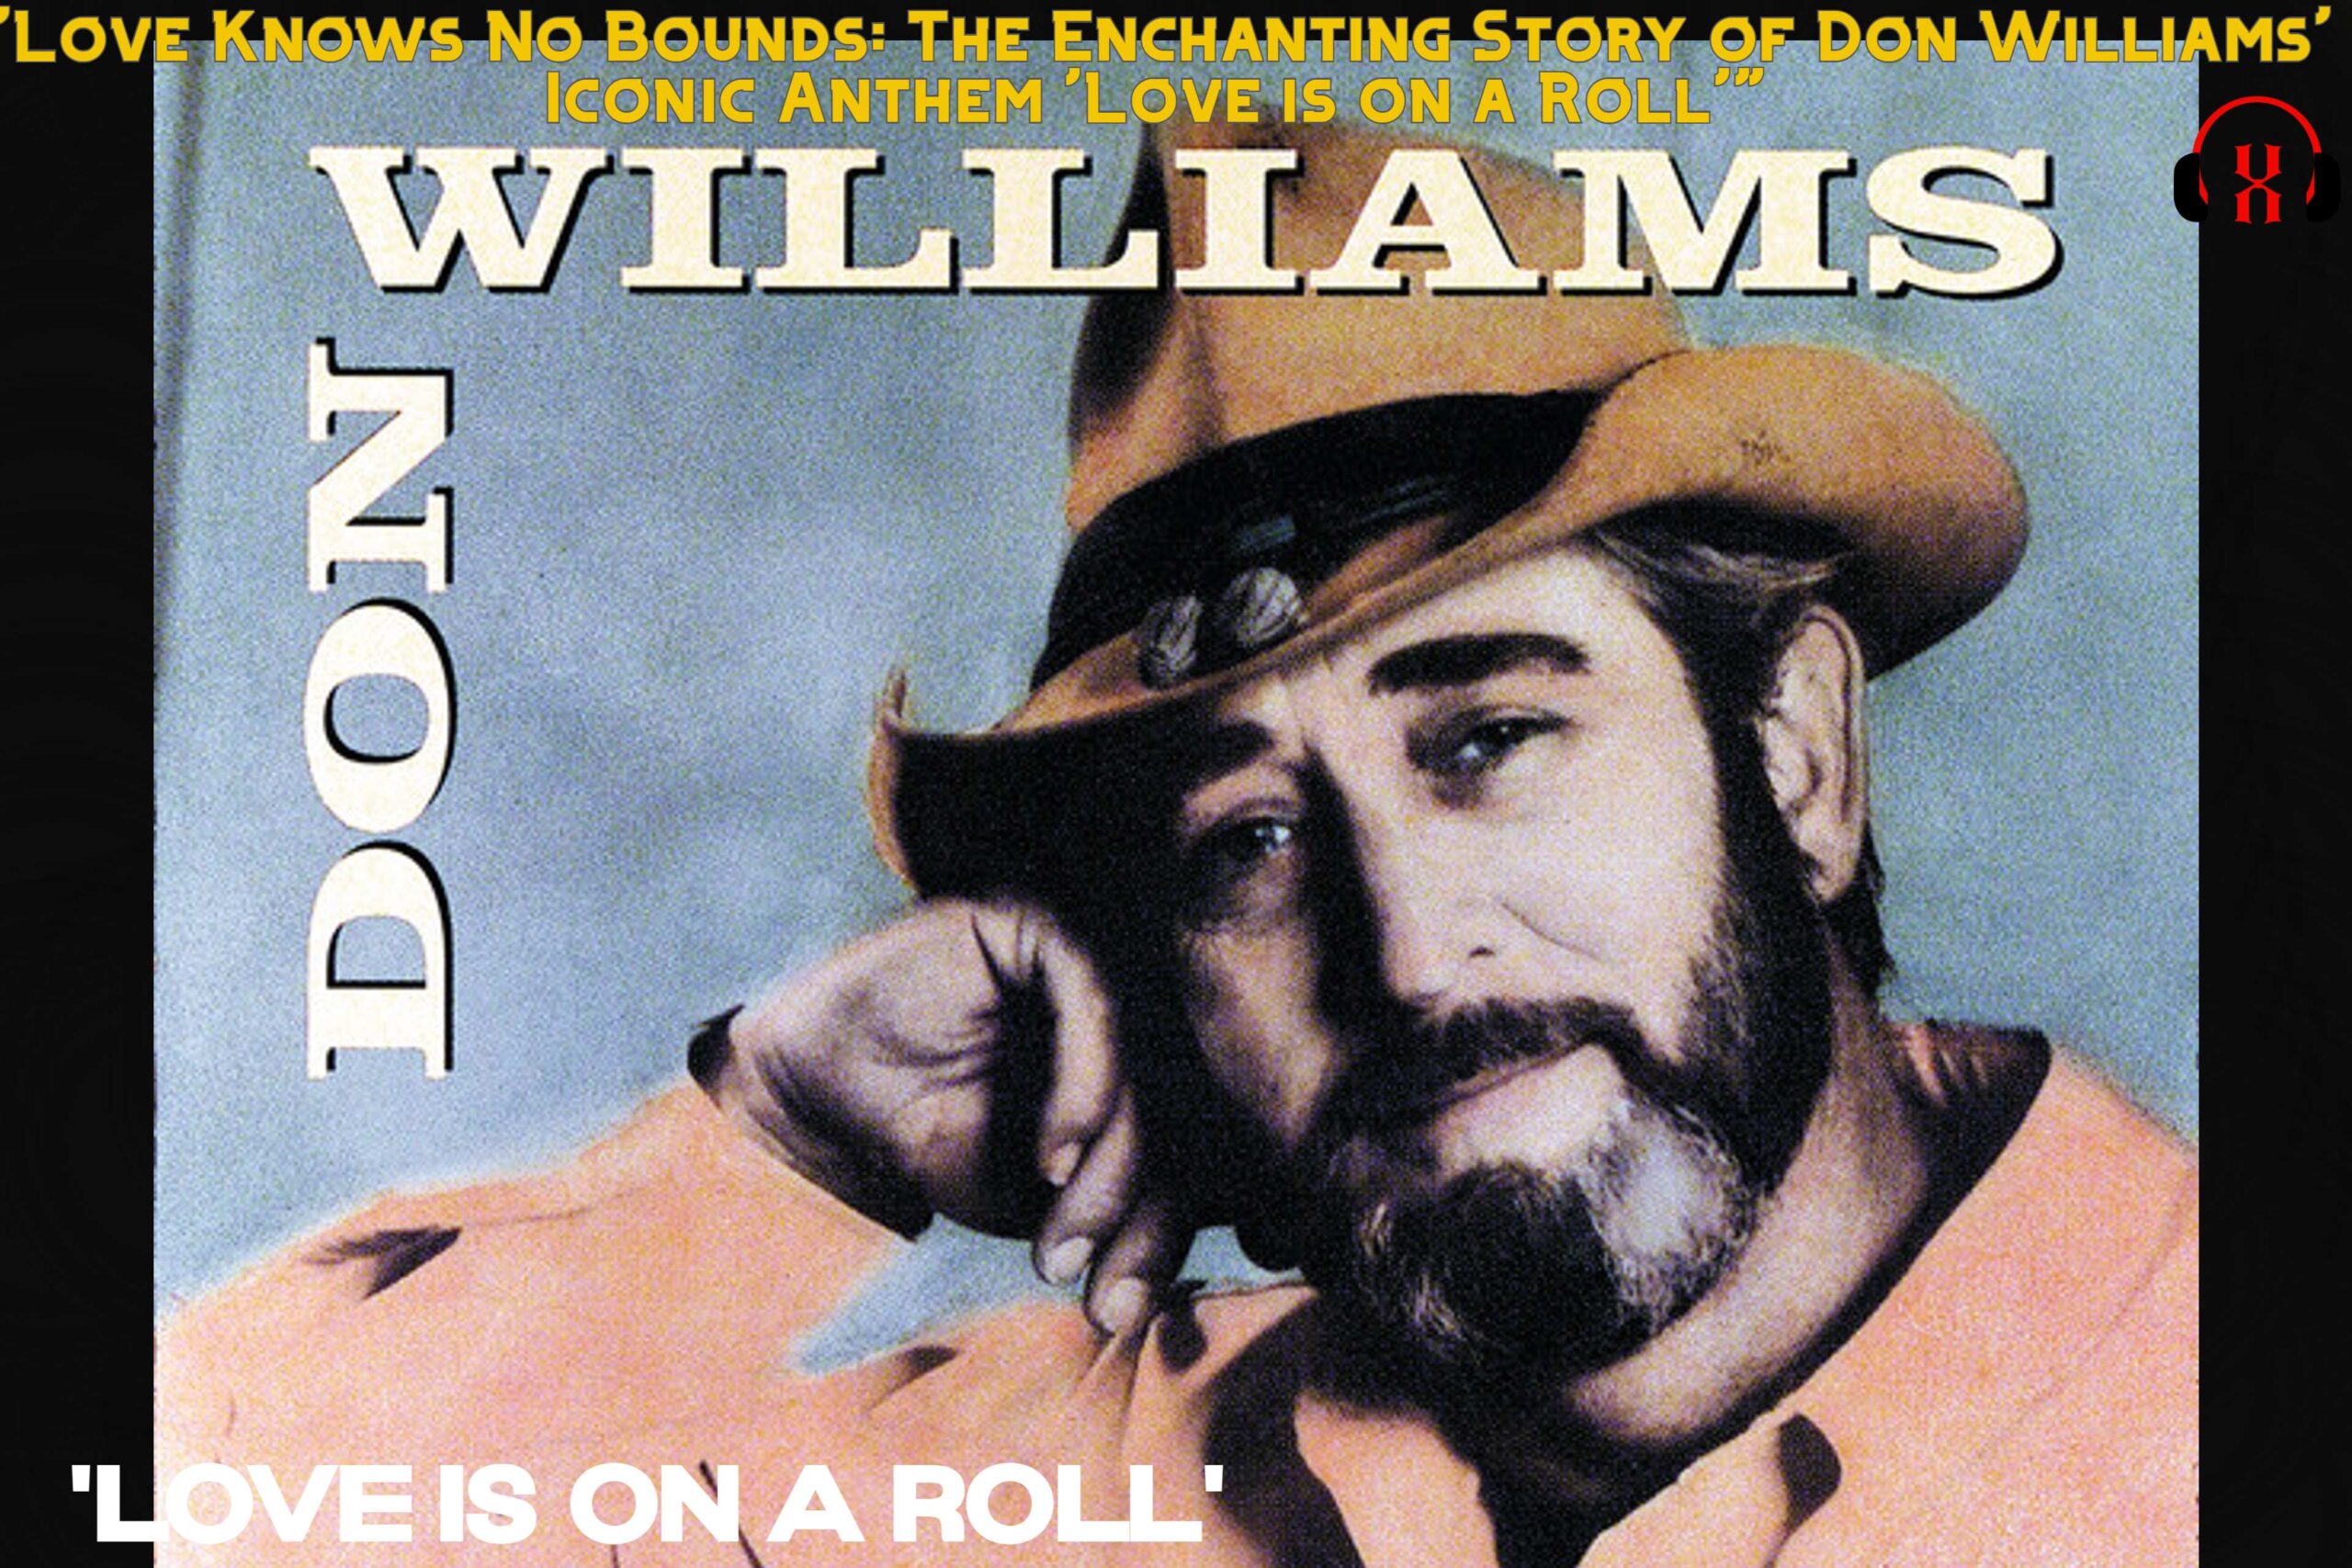 "Love Knows No Bounds: The Enchanting Story of Don Williams' Iconic Anthem 'Love is on a Roll'"